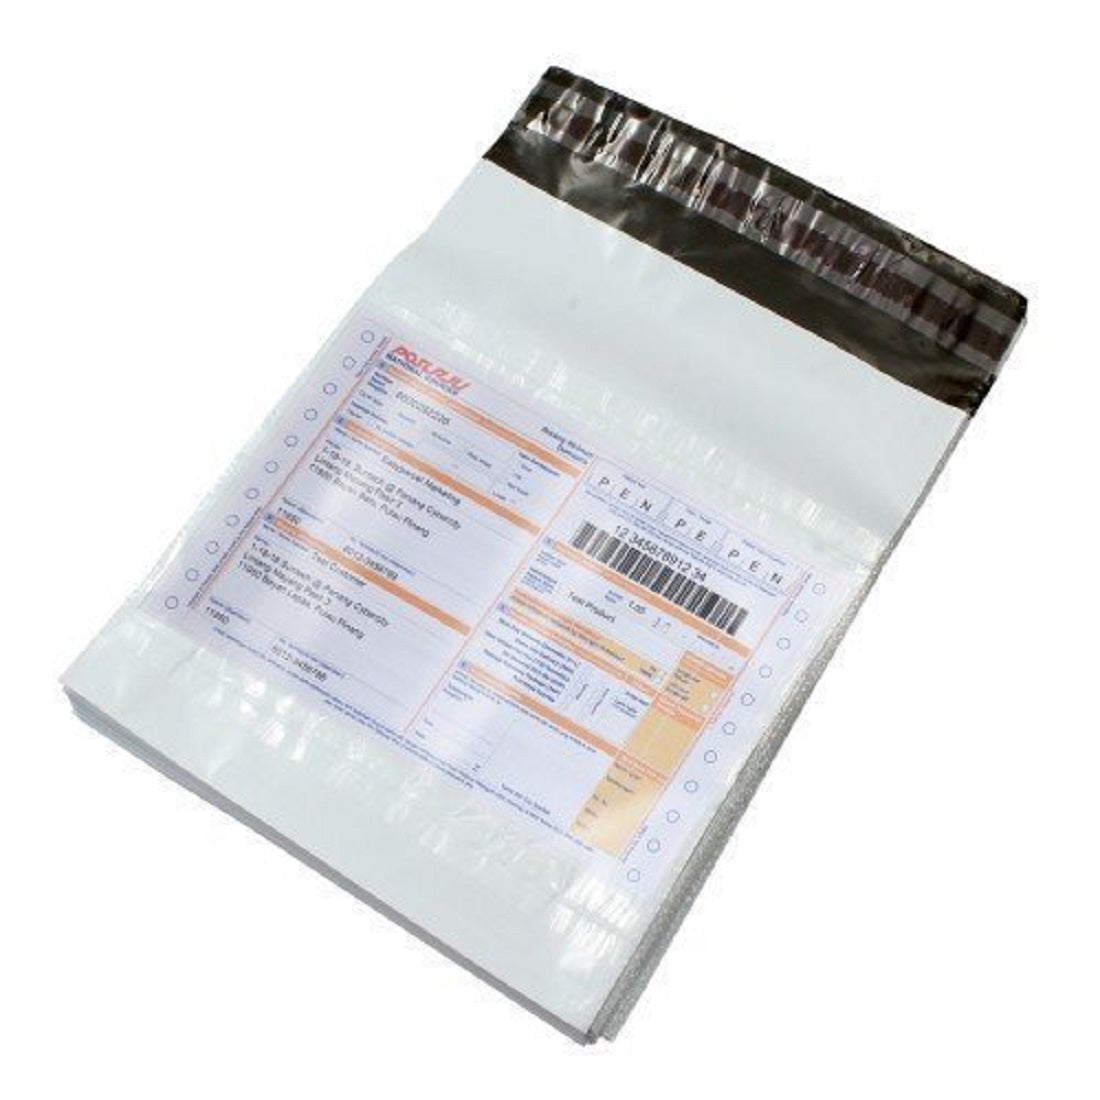 Courier Bags/Envelopes/Pouches/Cover 8X12 inches+ 2inch Flap  Pack of 50 Tamper Proof Plastic Polybags for Shipping/Packing (With POD)